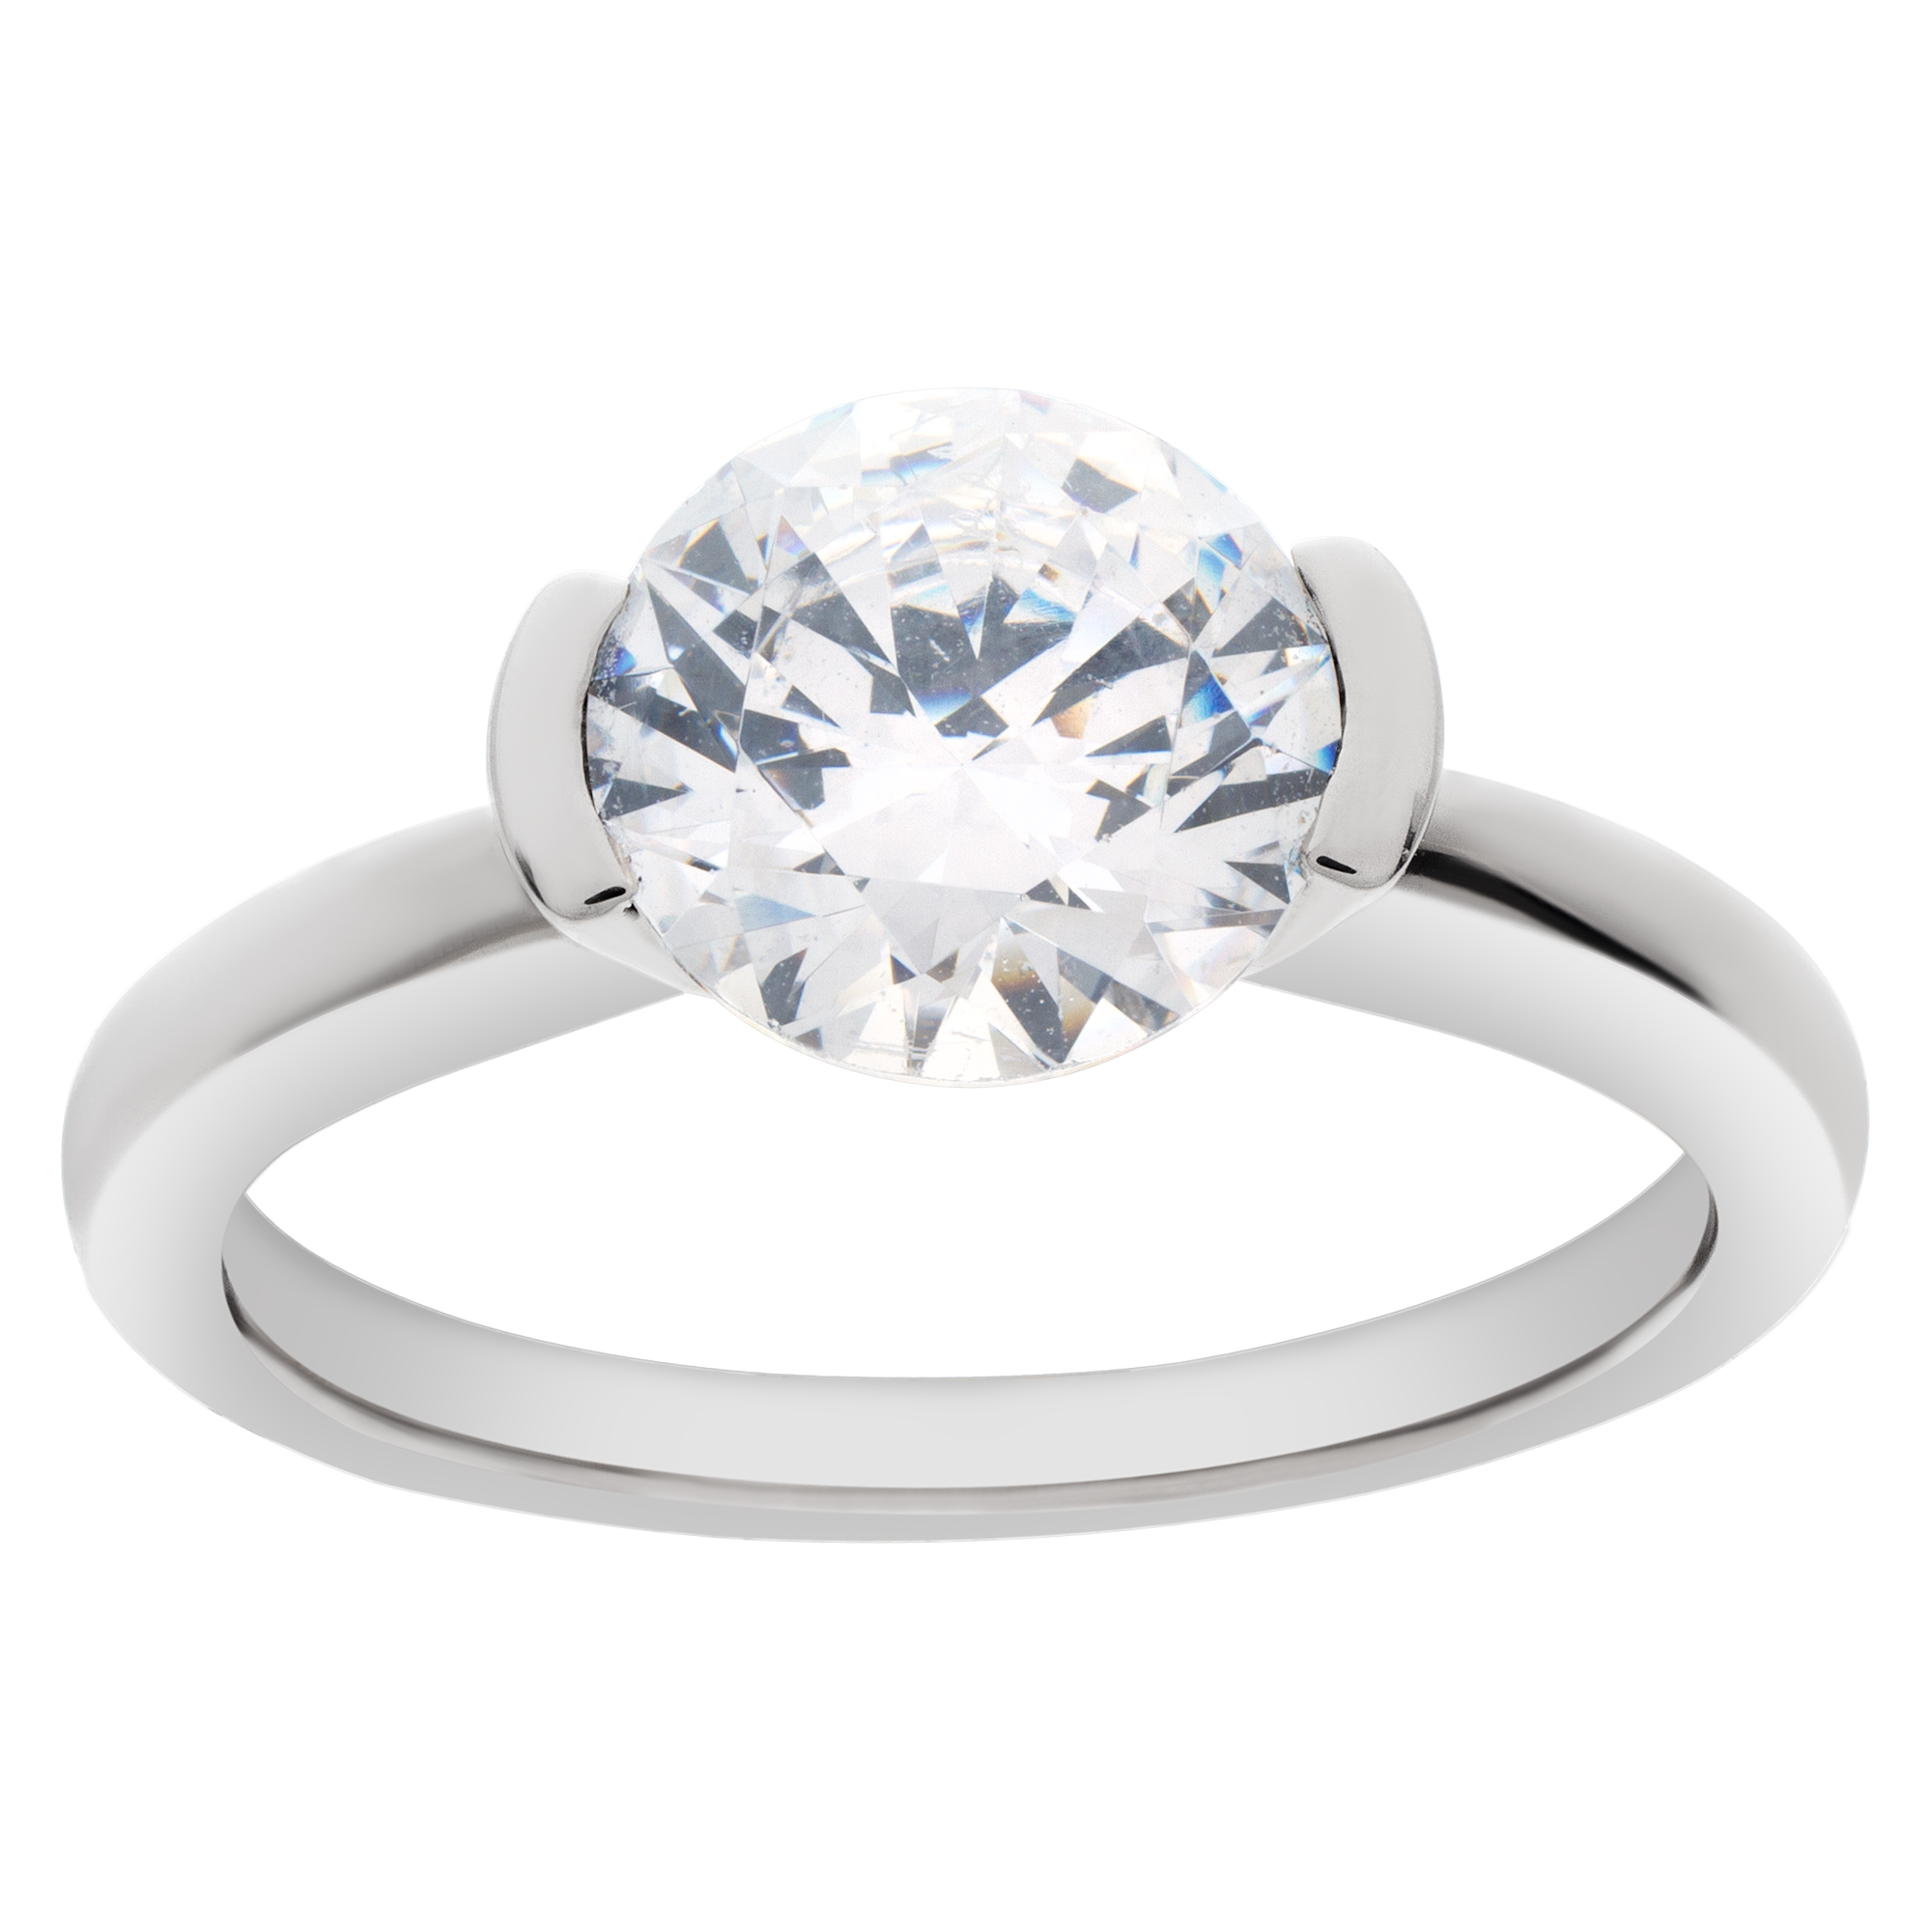 Ritani 18k white gold mounting to hold 2.00ct round center diamond. (Diamond not included)